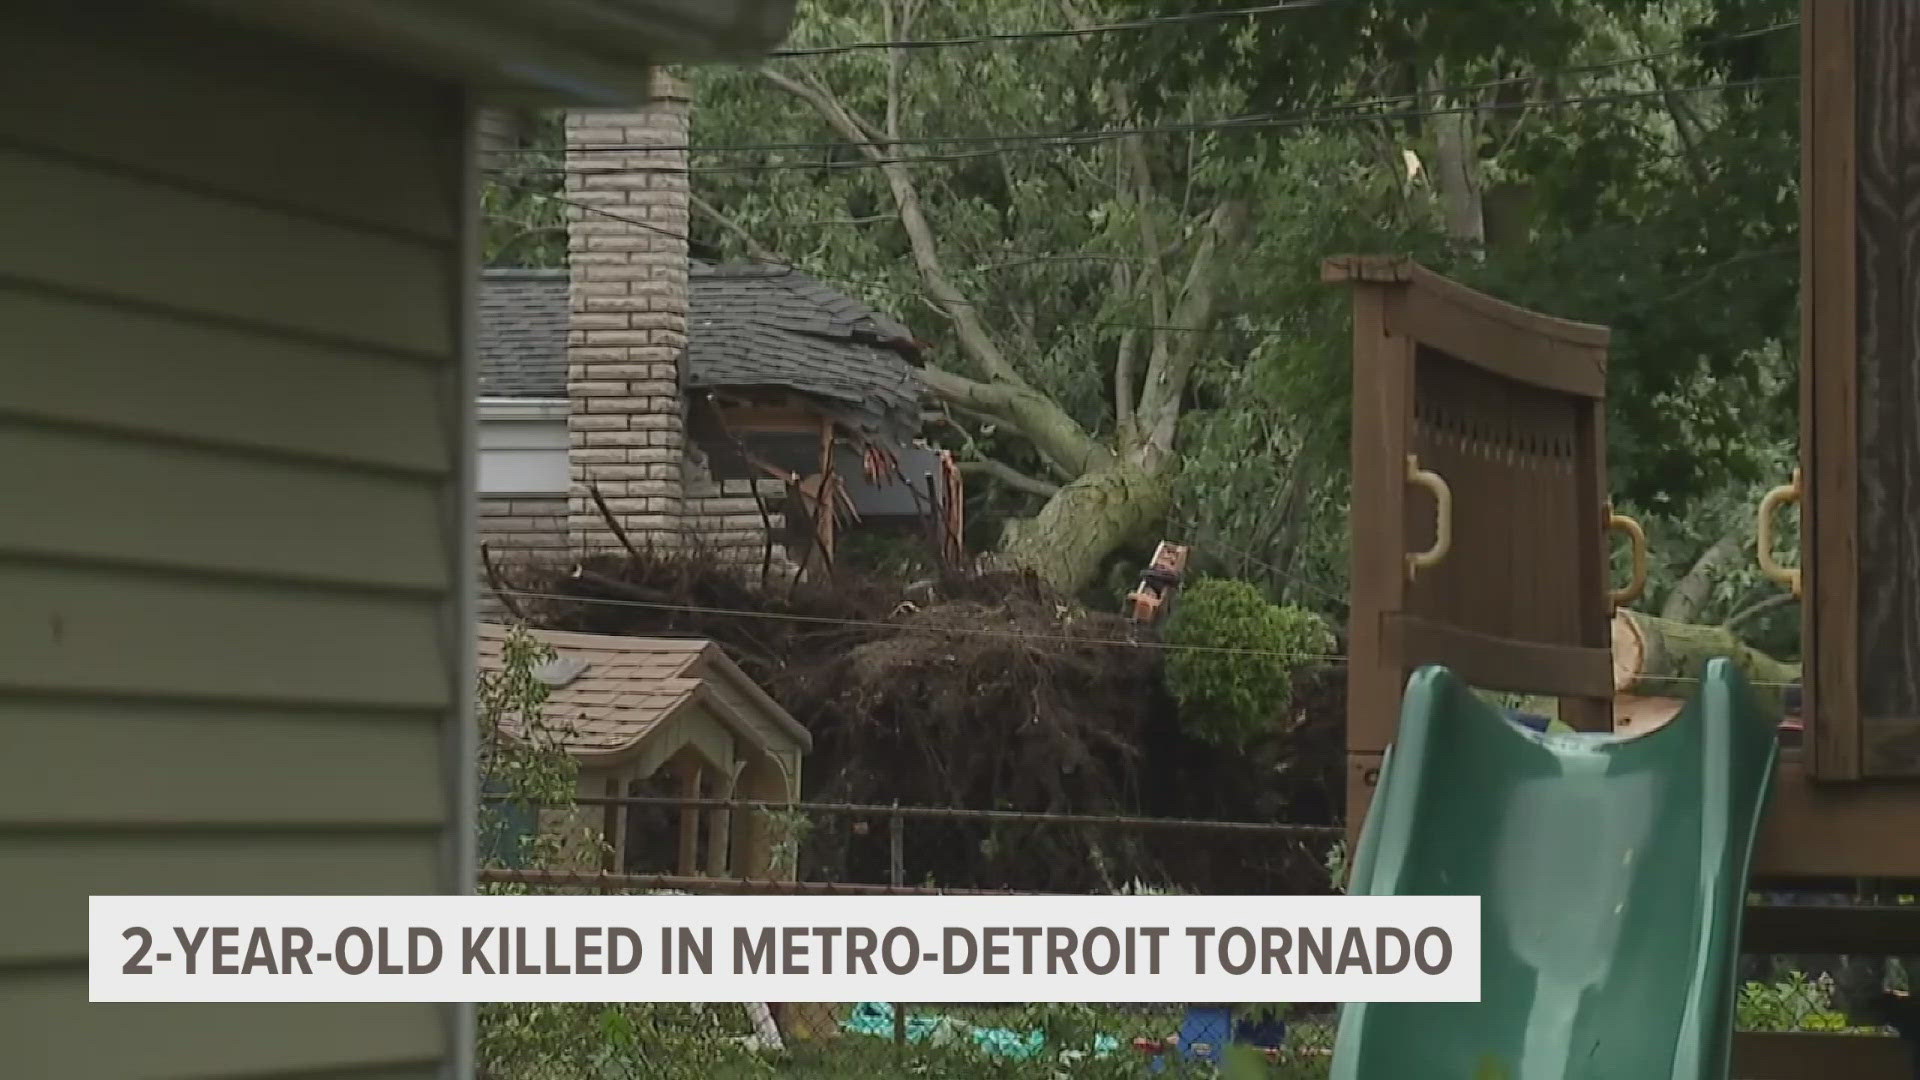 Livonia city officials said in a post on the city’s website that the quick-developing tornado struck several neighborhoods in the city on Wednesday afternoon.